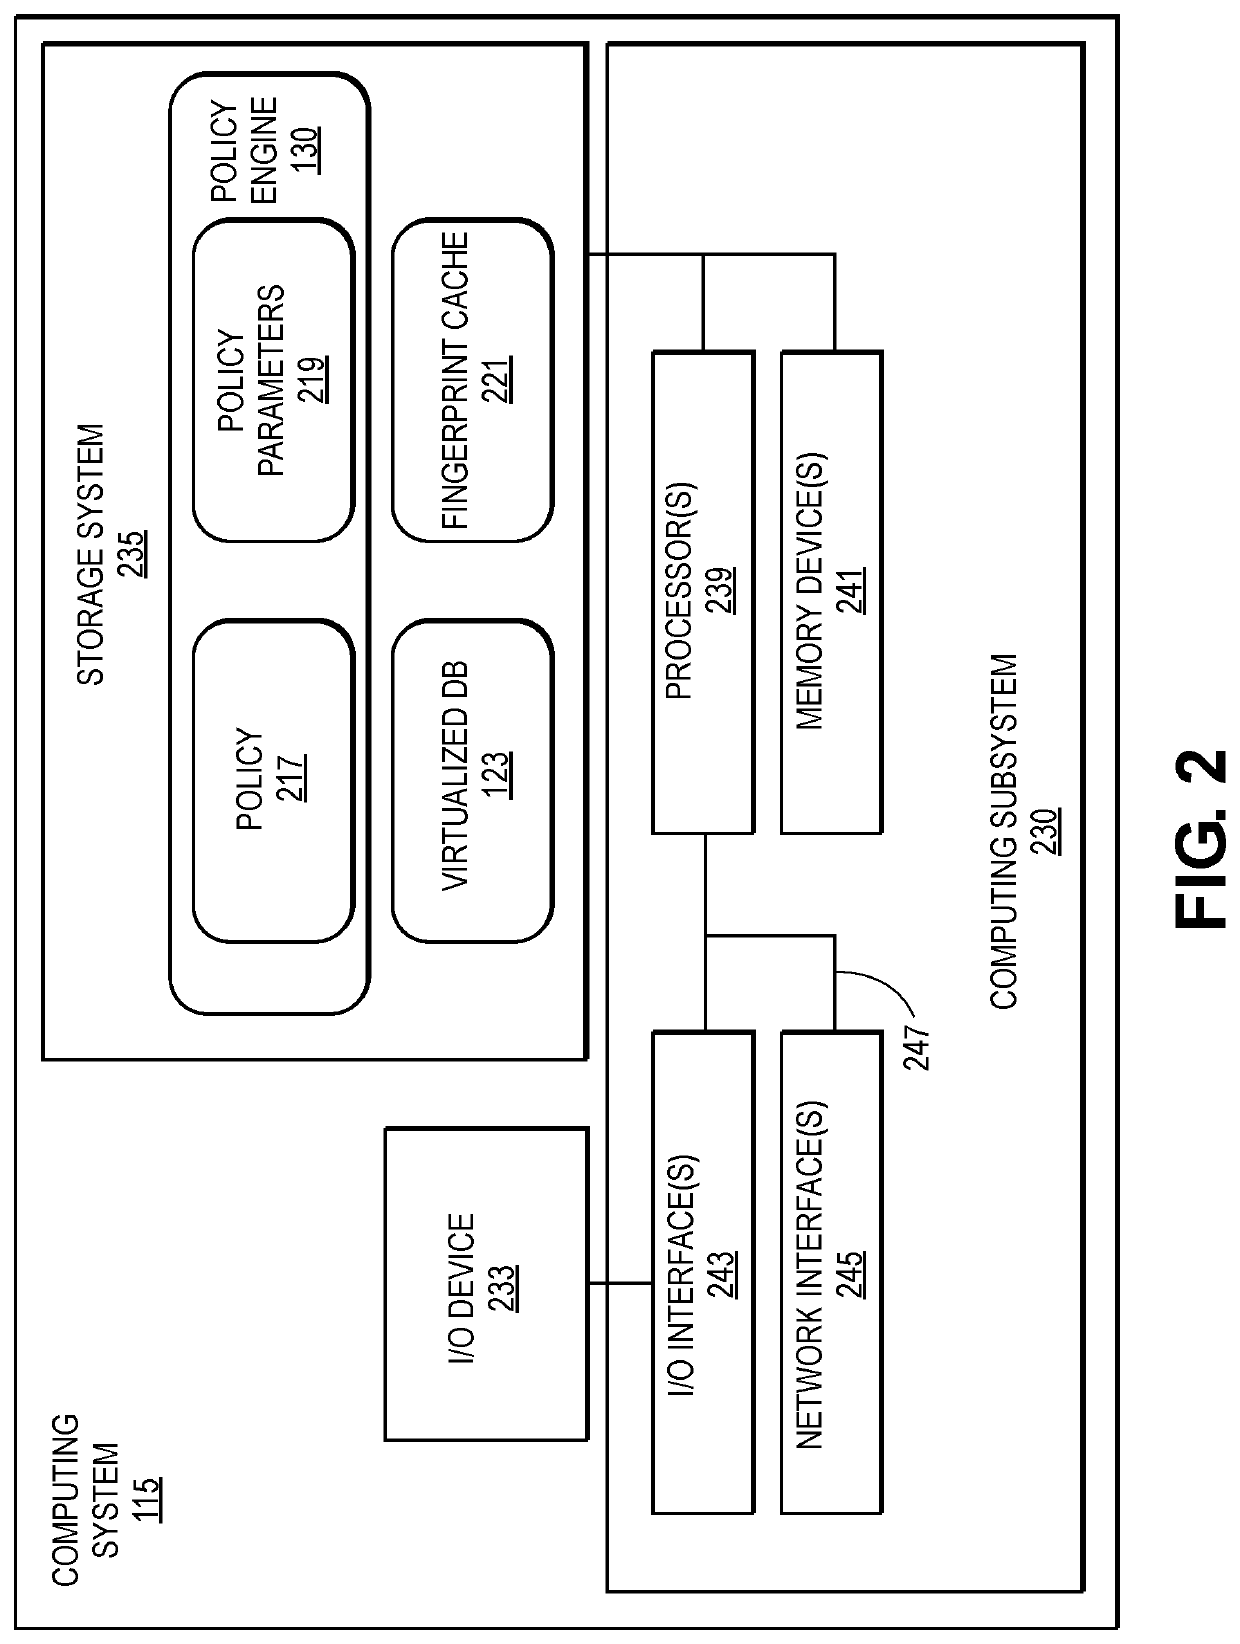 Systems and methods for obscuring data from a data source